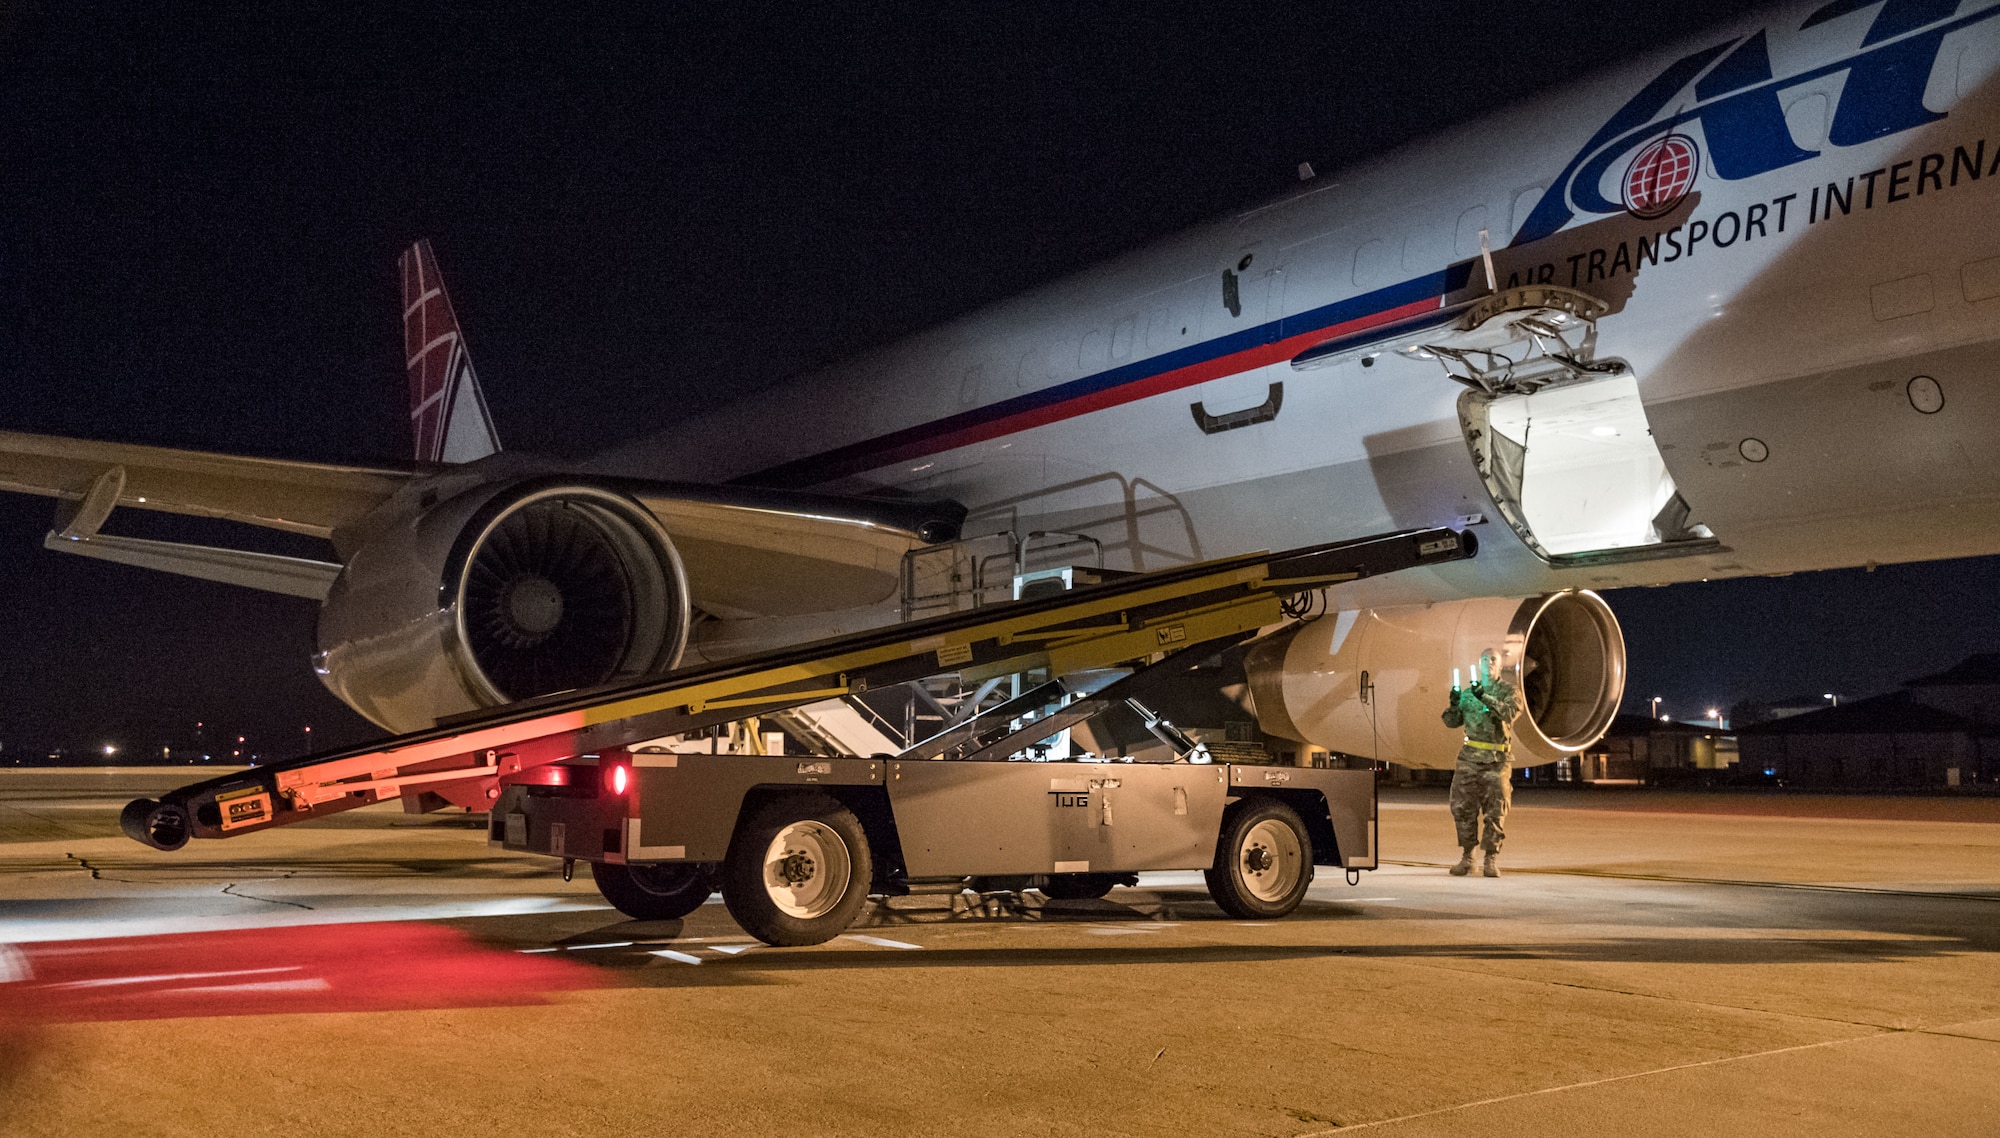 Passenger services personnel from the 436th Aerial Port Squadron load baggage into the lower cargo hold of an Air Transport International Boeing 757-200 Sept. 8, 2019, at Dover Air Force Base, Del. The ATI aircraft, part of the Civil Reserve Air Fleet program, was contracted to transport cargo and 30 Team Dover members to Fairchild AFB, Wash., participating in Mobility Guardian 2019. “This mission is multidimensional and will provide a greater understanding of the commercial airlift capabilities and requirements across Air Mobility Command and the commercial airlift enterprise,” said Maj. Adam Crane, AMC Headquarters CRAF Branch Chief, Scott AFB, Ill. (U.S. Air Force photo by Roland Balik)